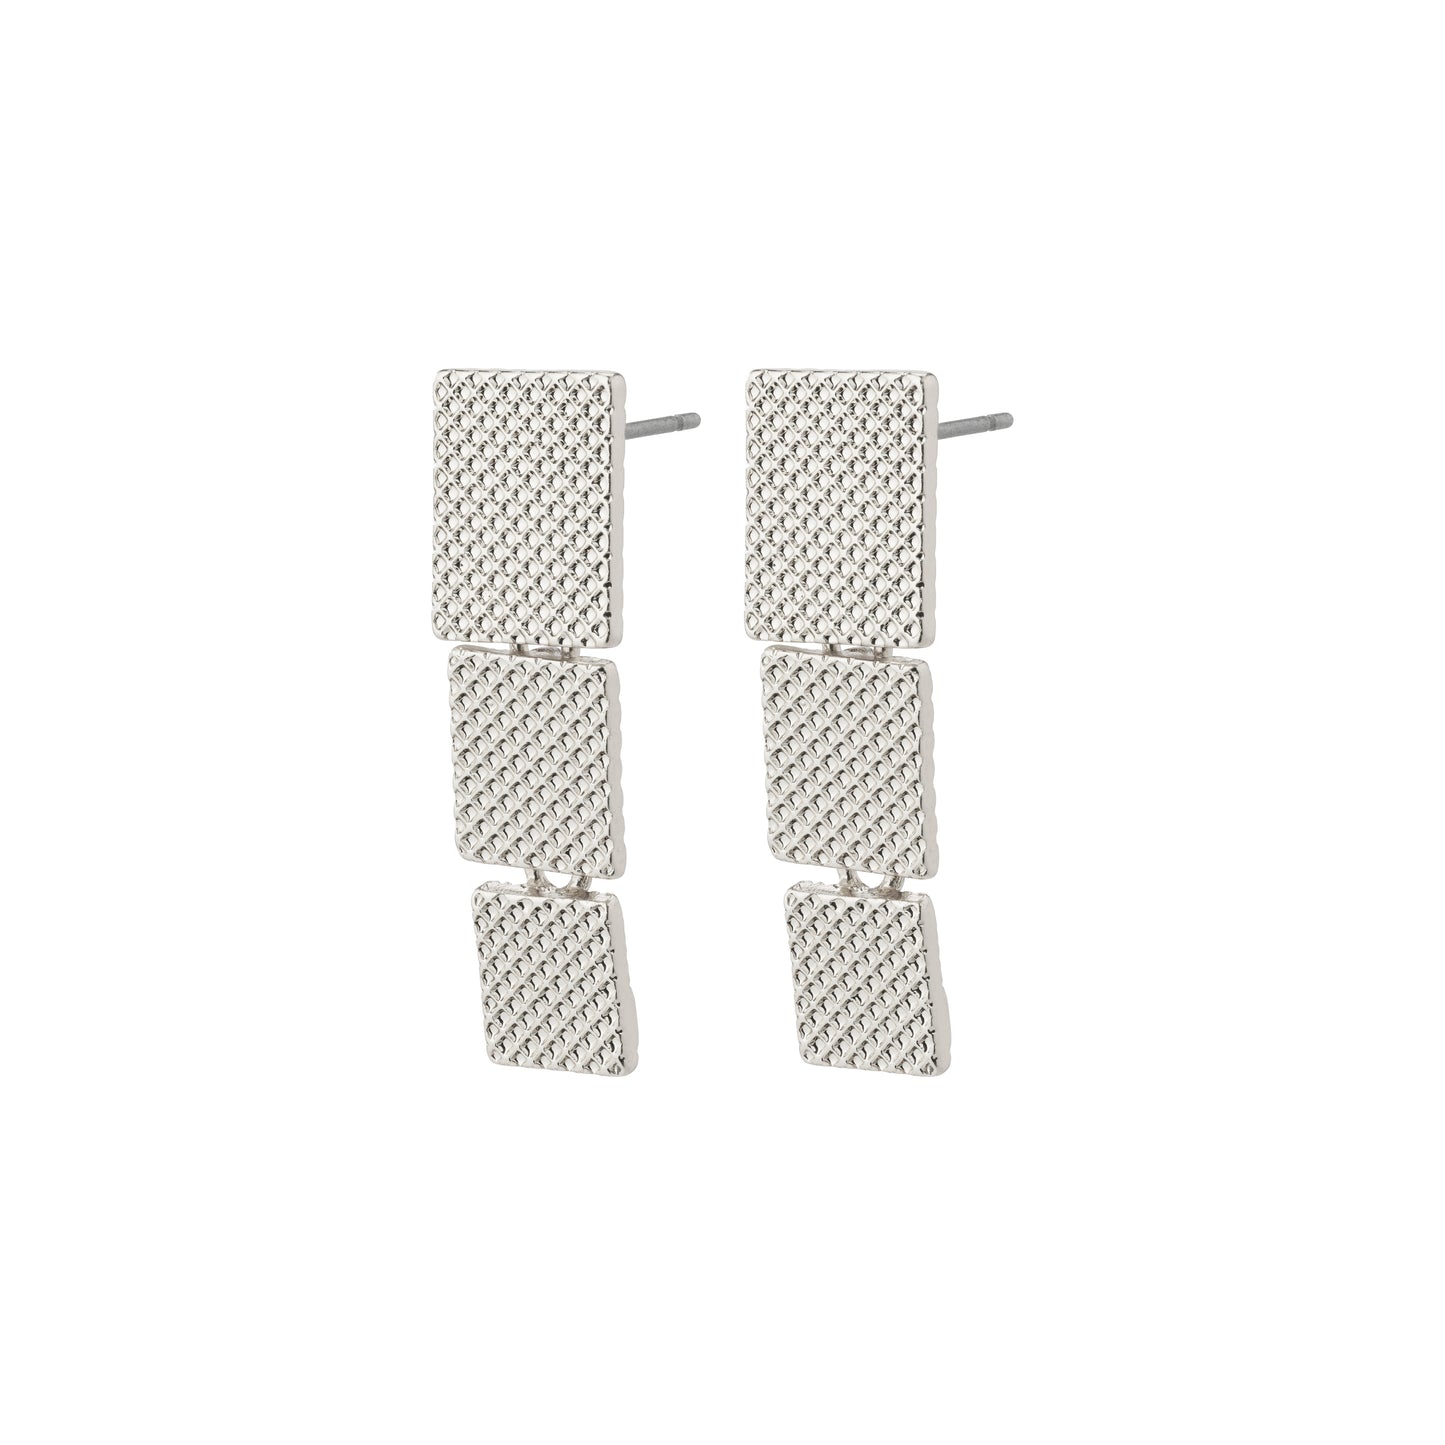 KLAUDIA recycled earrings silver-plated